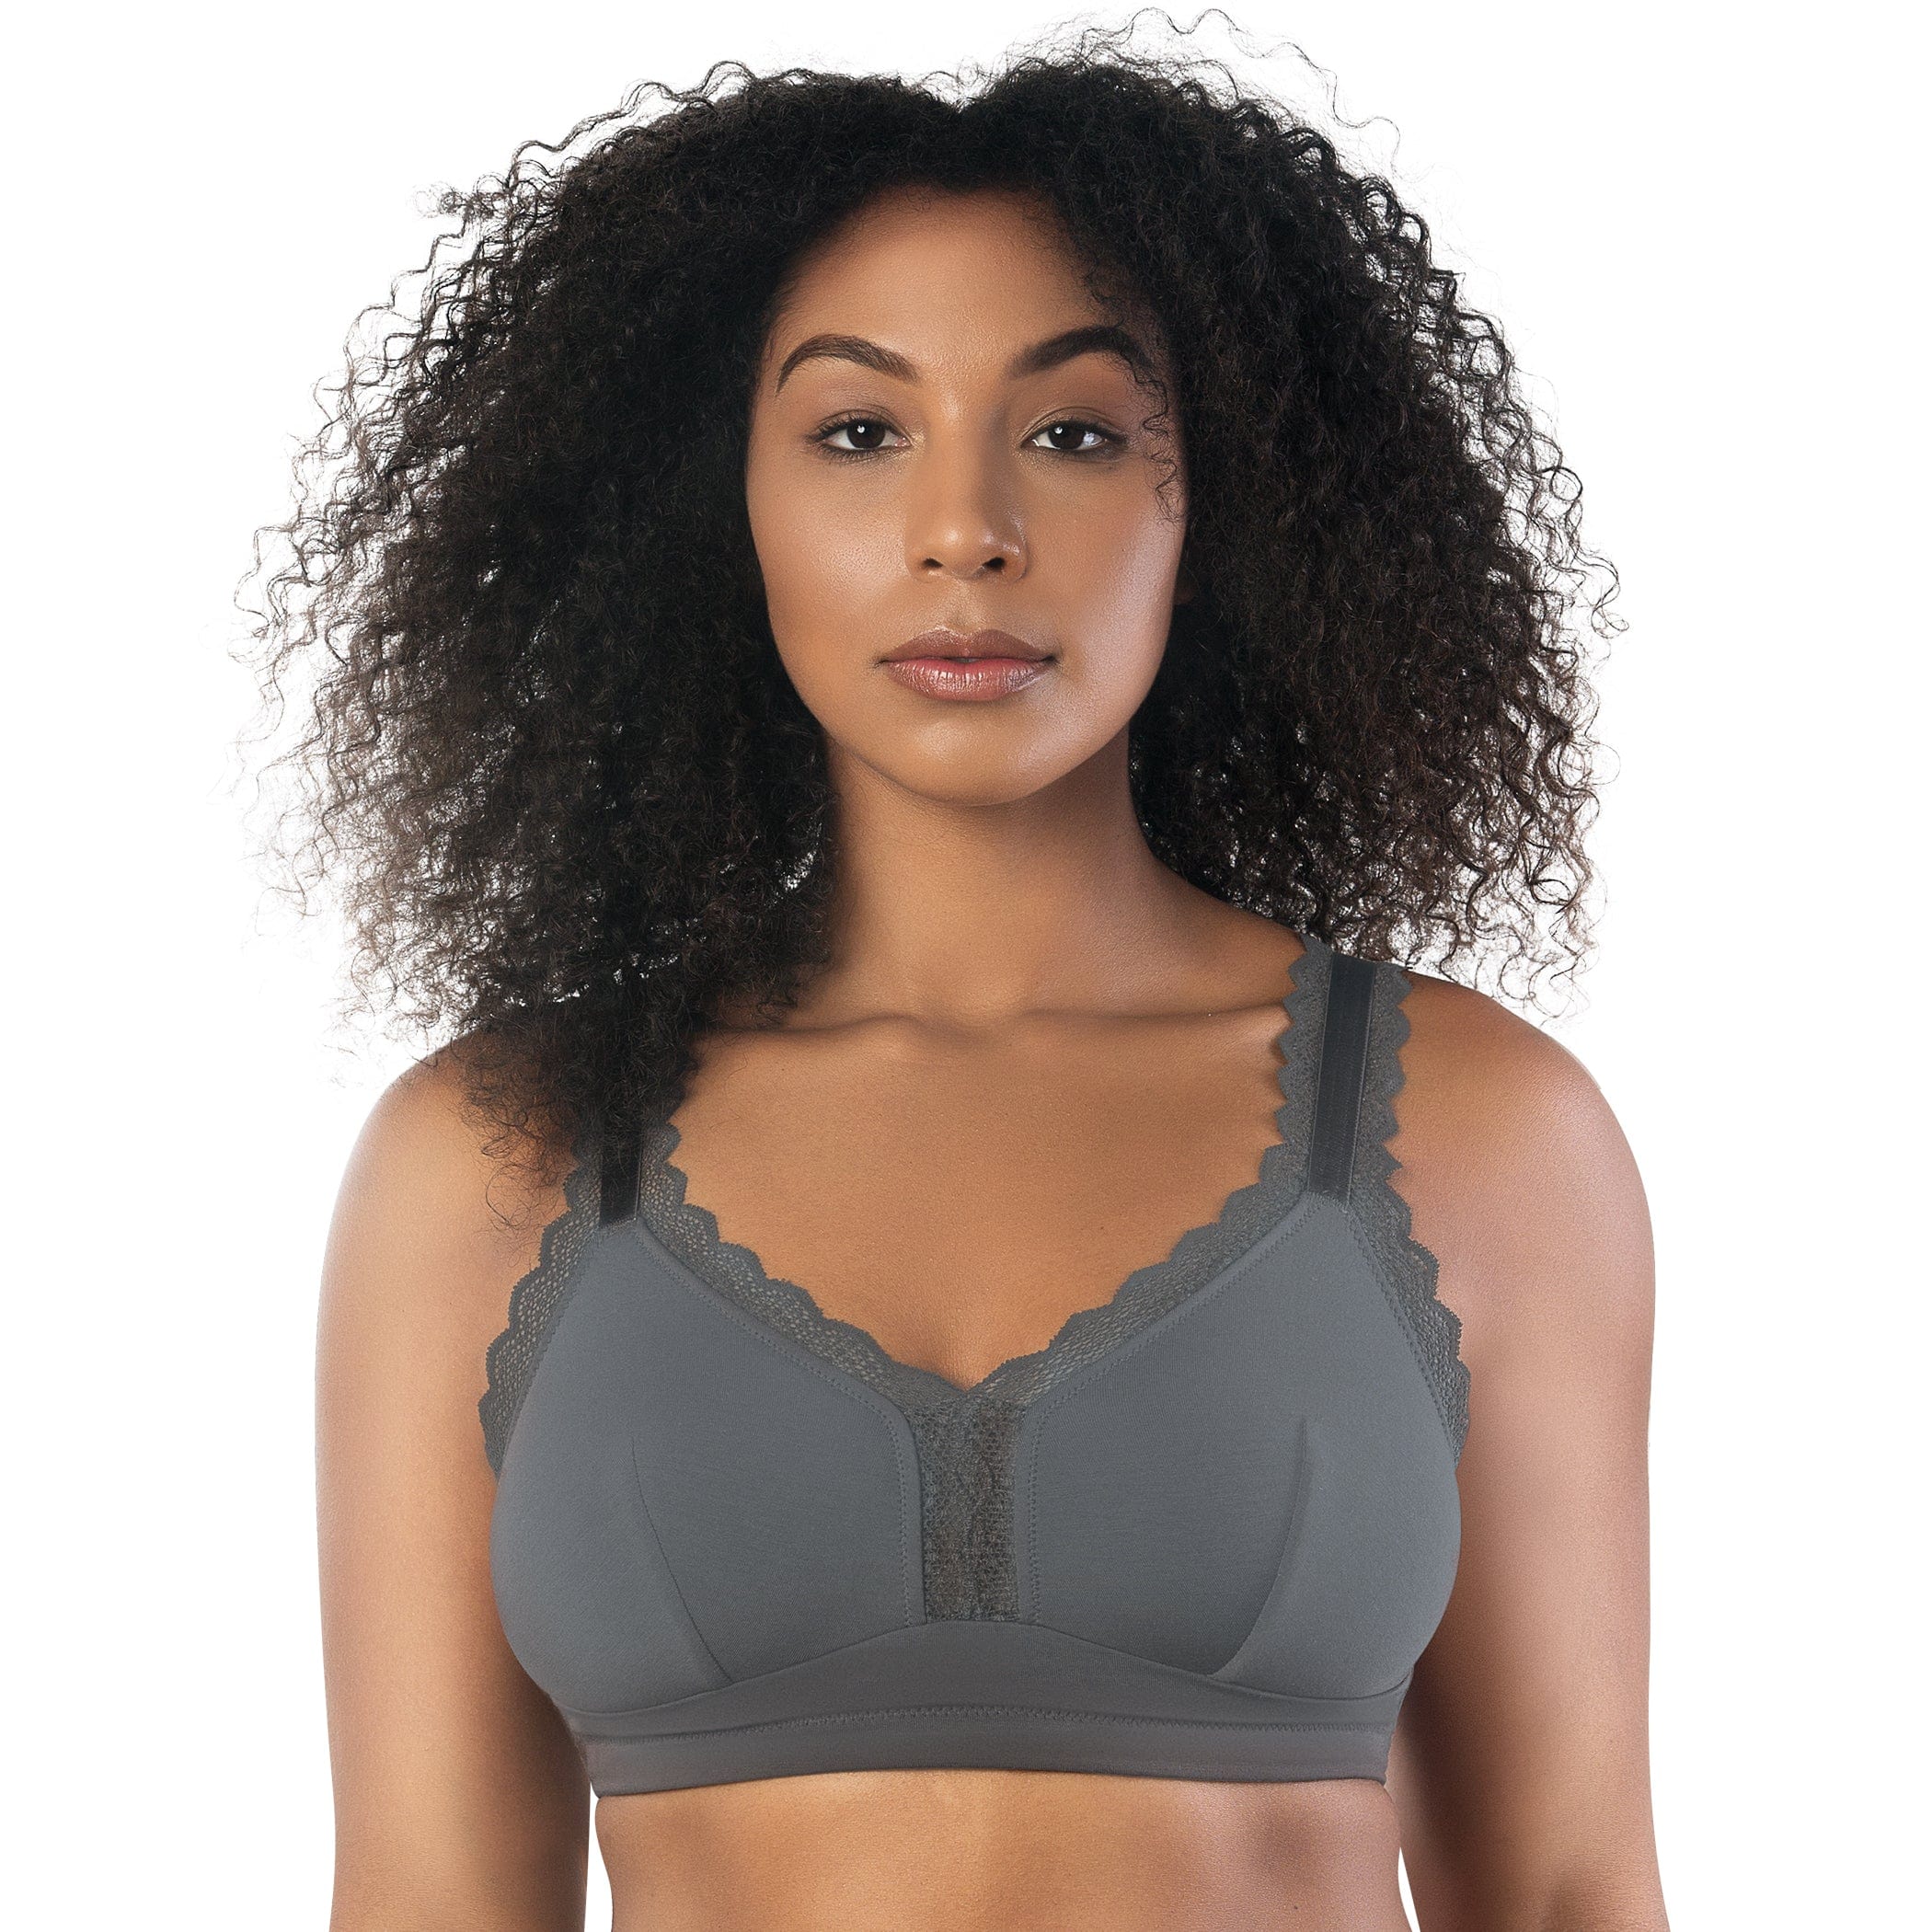 Forlest - Finding the perfect wireless bra? Look no further than the Dahlia  comfort bra. Brittany's favorite bra, Dahlia, has adjustable straps and a  40.7% modal lining for ultimate comfort. 😍 #forlestbra #